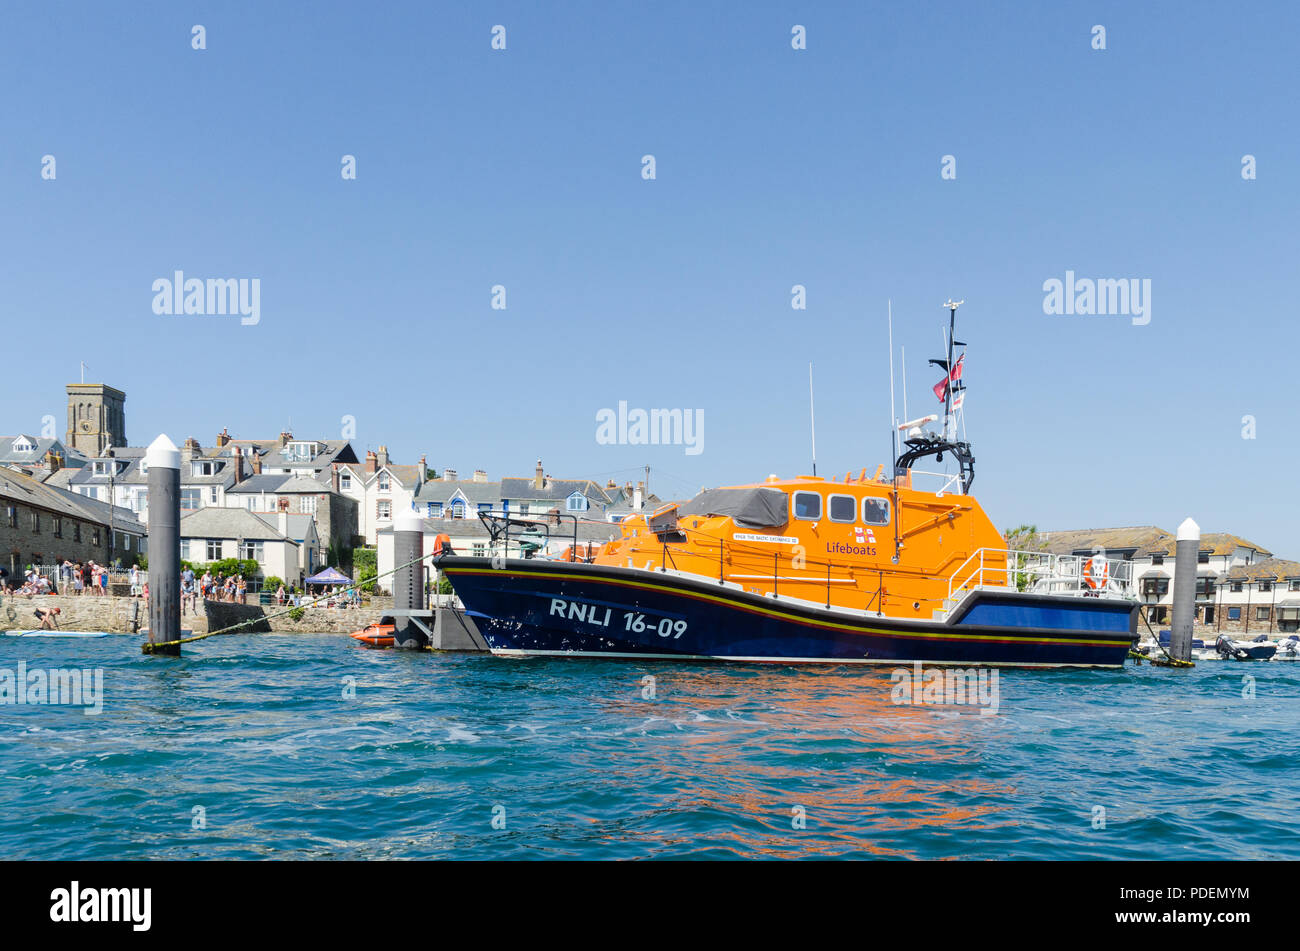 Baltic Exchange lll, the Salcombe RNLI Lifeboat moored on a pontoon in the pretty sailing town of Salcombe in the South Hams,Devon,England Stock Photo